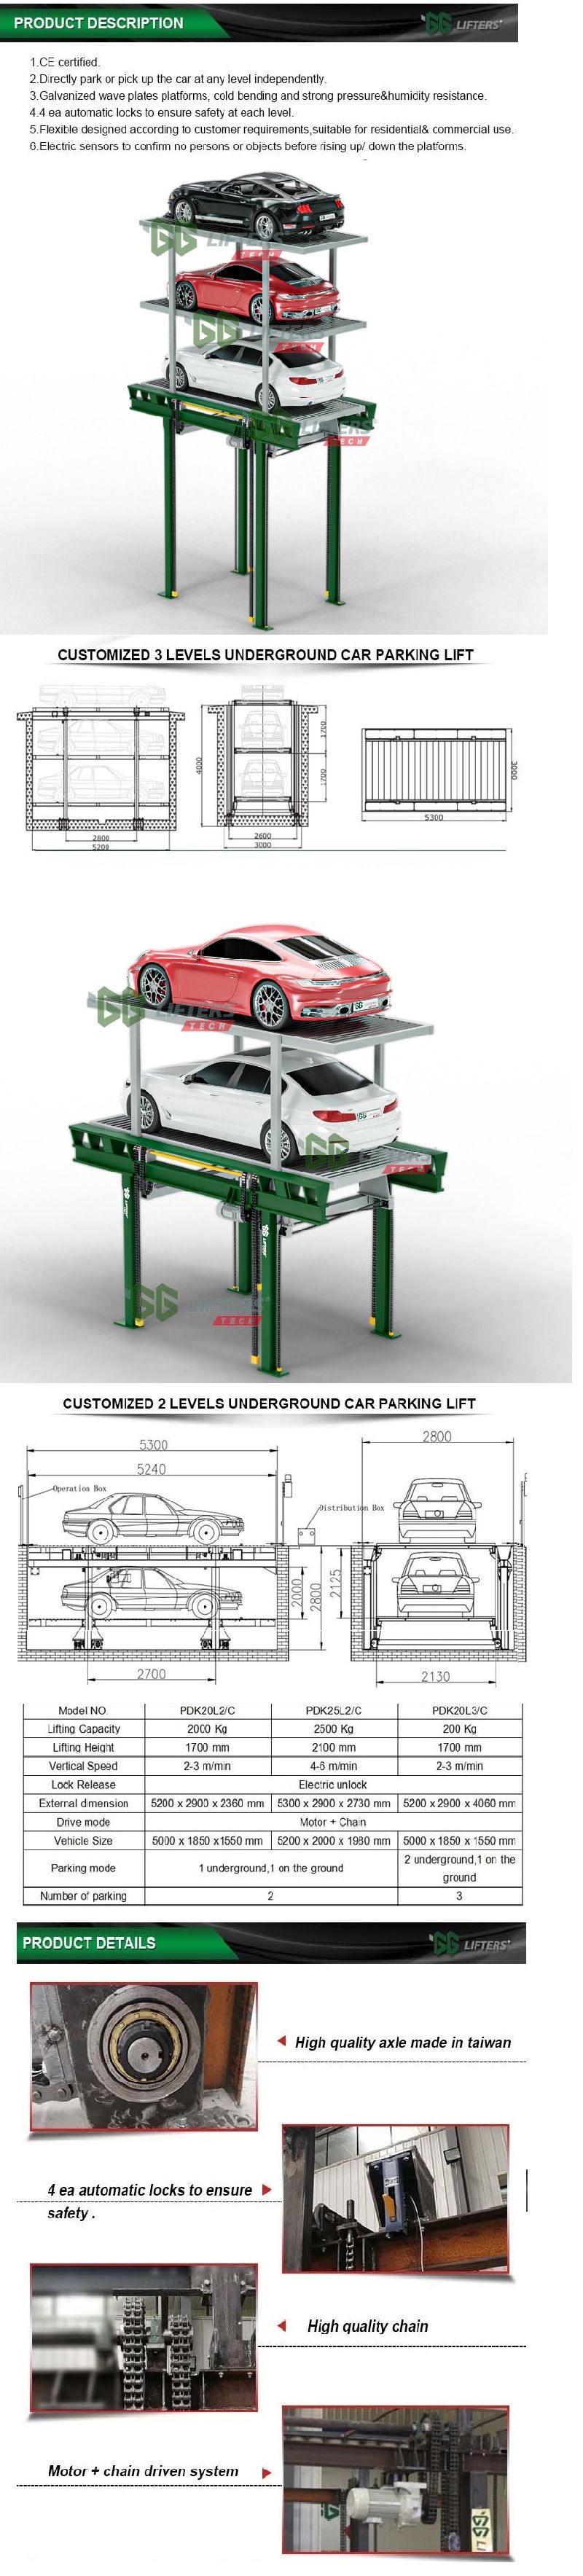 Pit parking system inground car lift for 2-3 levels